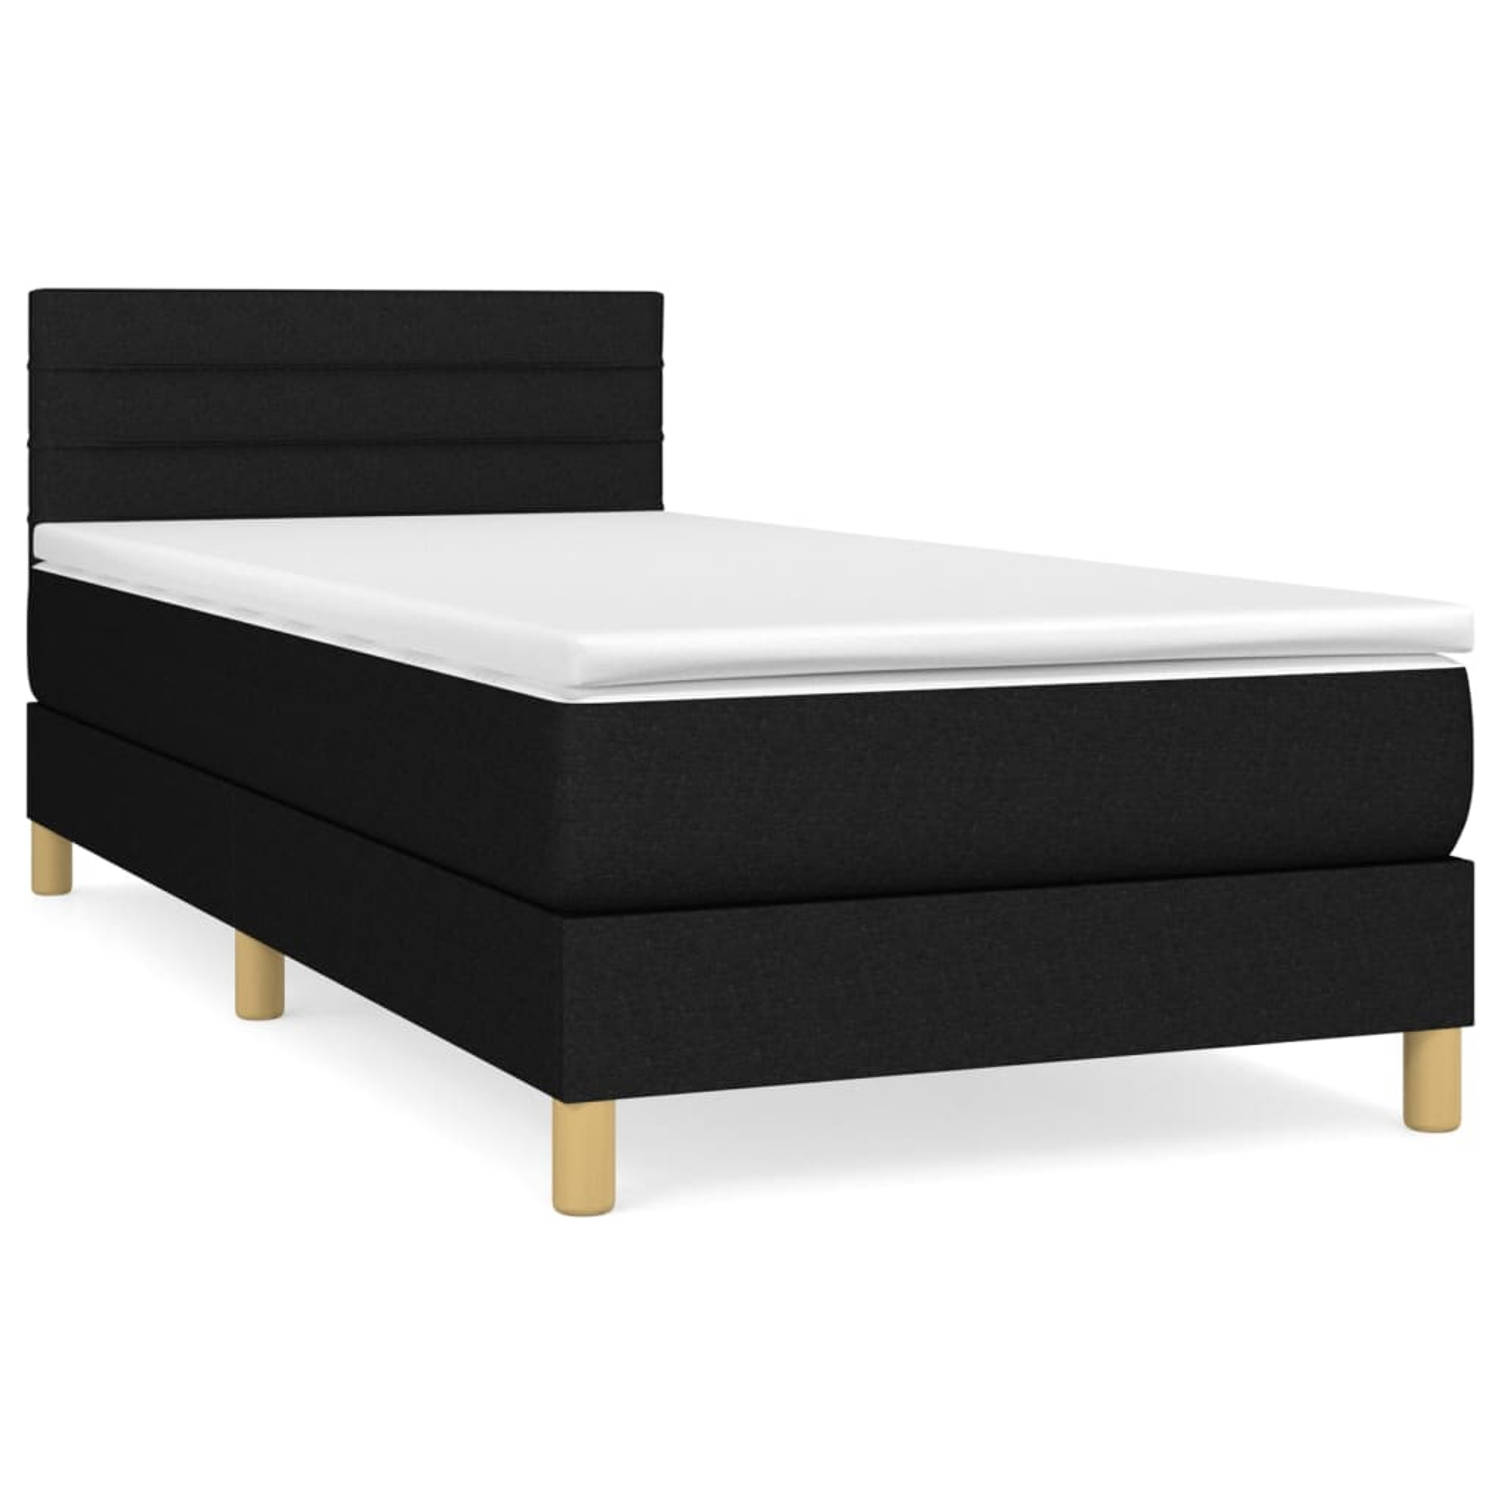 The Living Store Boxspringbed - Comfort - Bed - 203 x 80 x 78/88 cm - Zwart